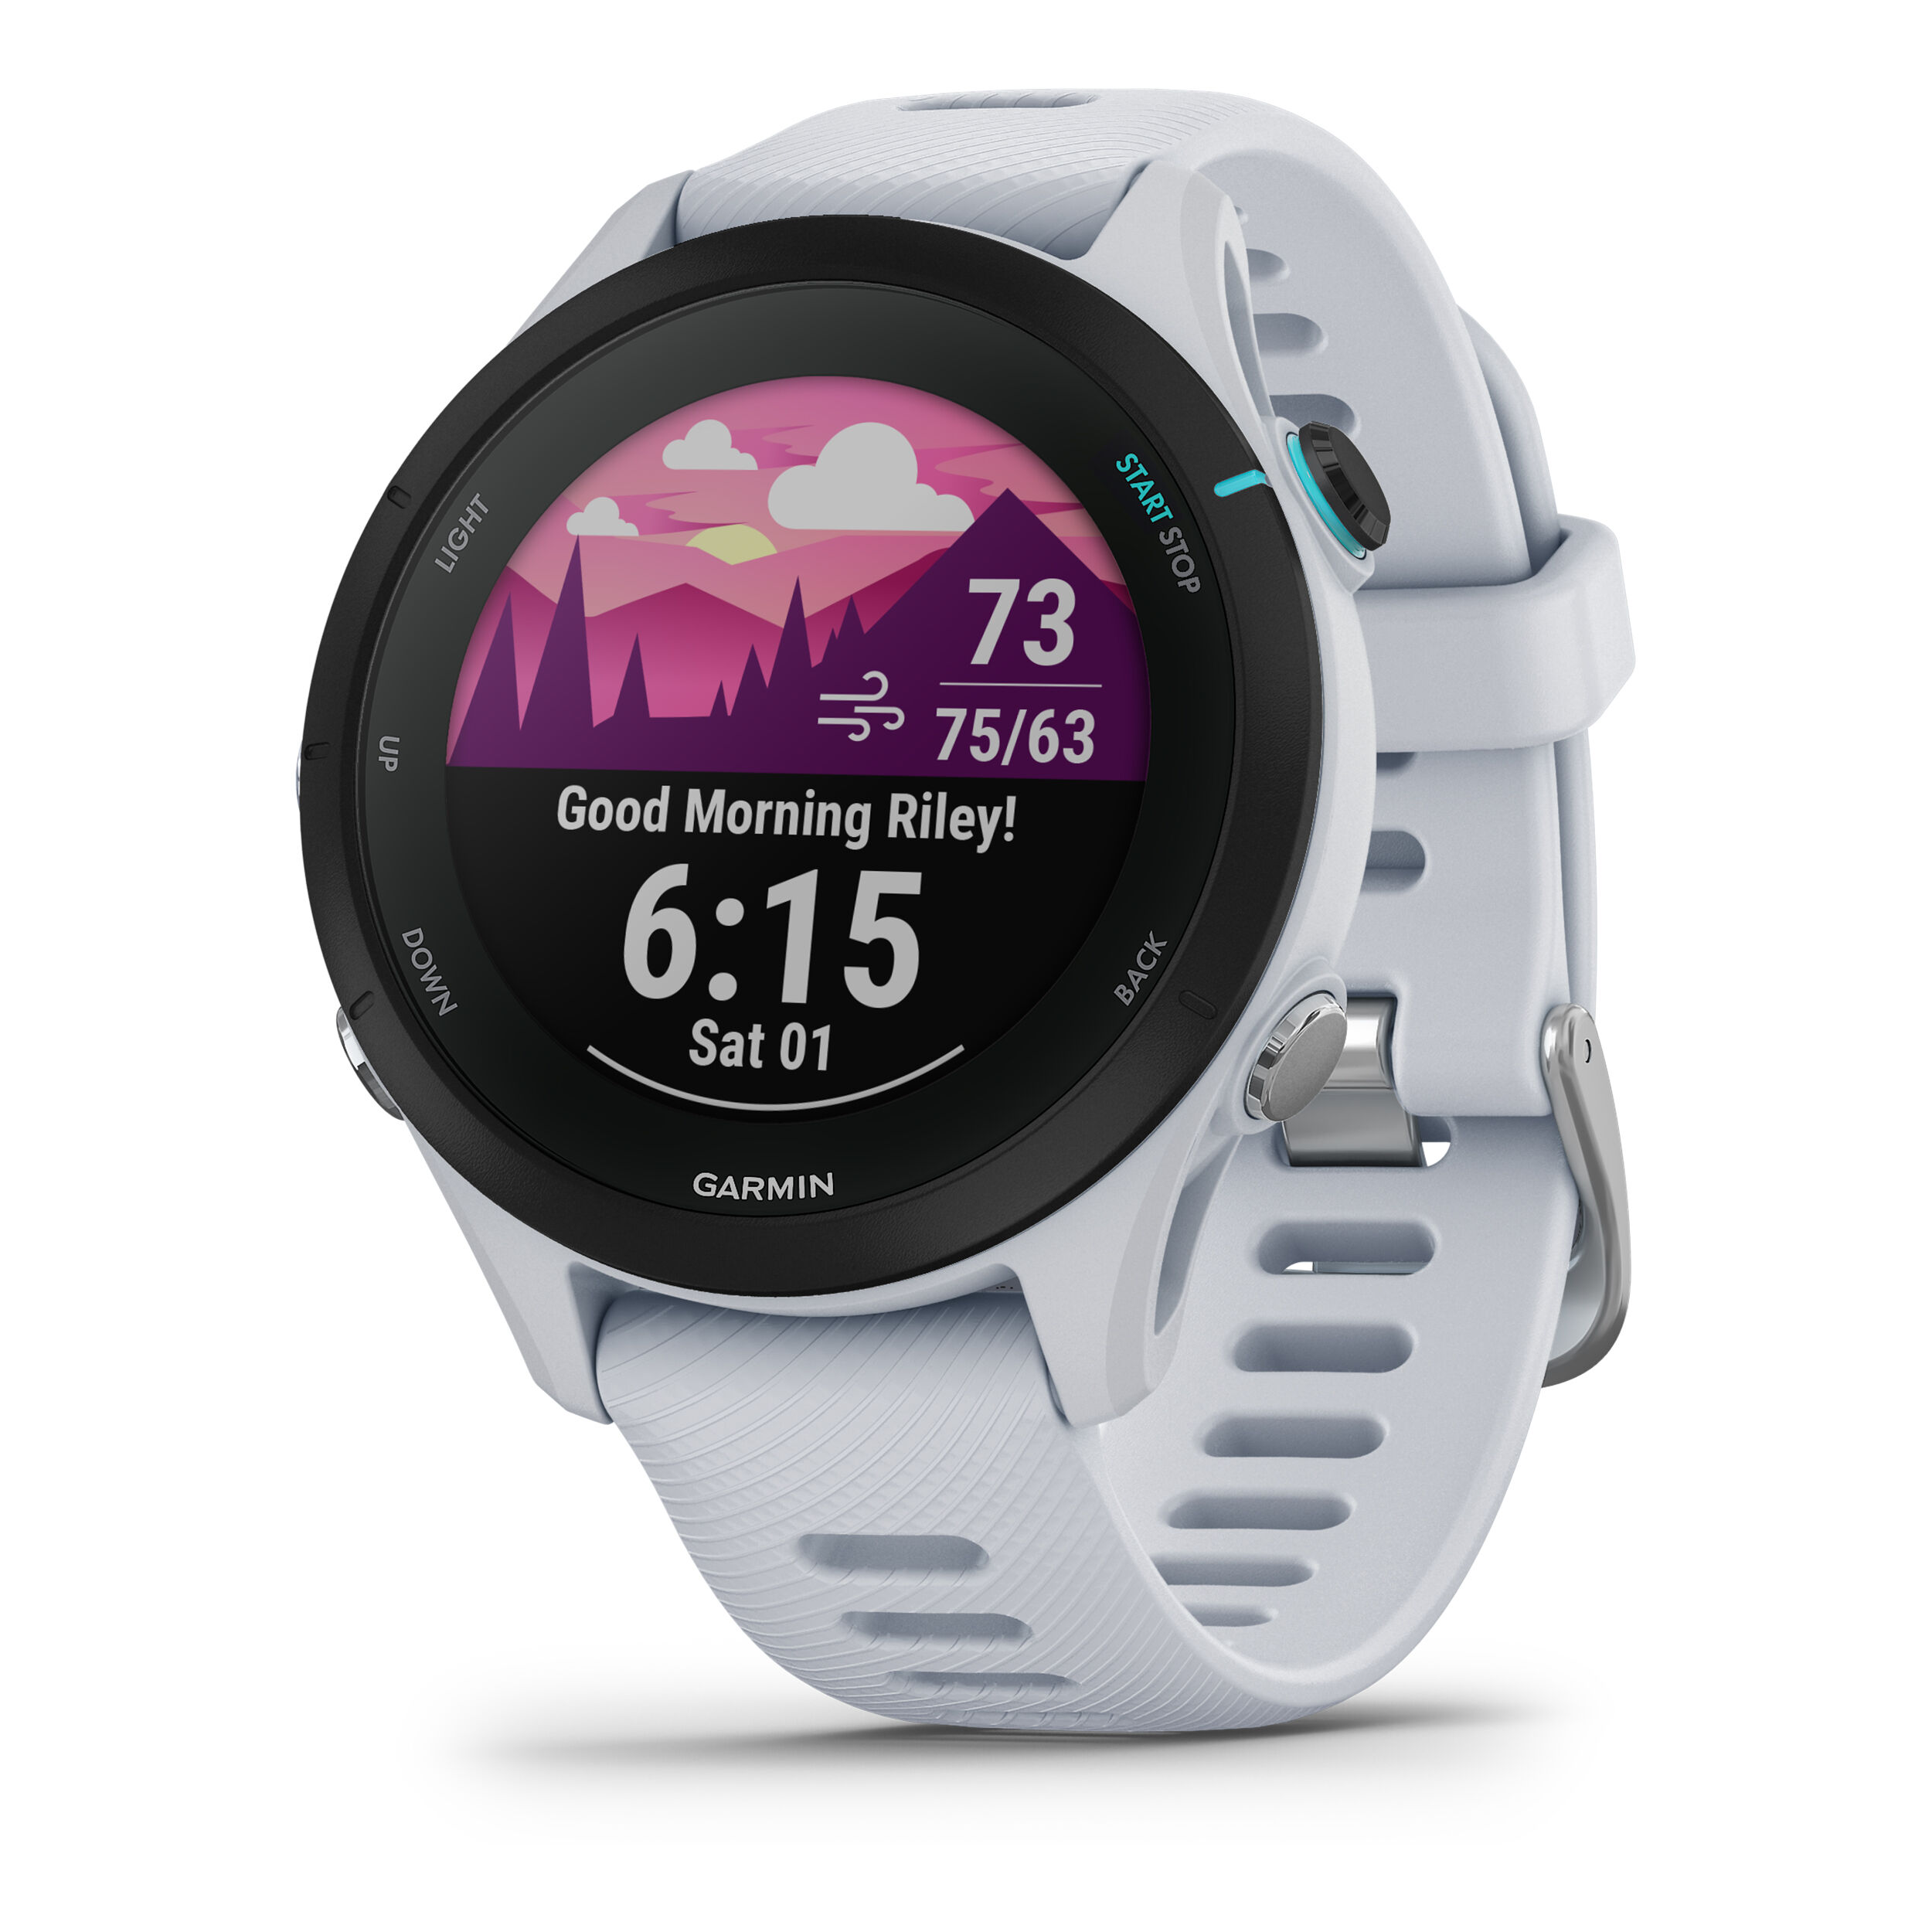 Garmin Forerunner 945 Review | Tested & Rated